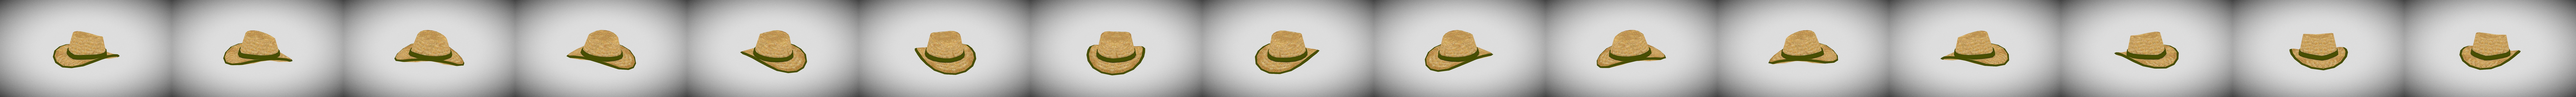 Straw Hat For Roblox Game Buy Royalty Free 3d Model By Catafest Catafest 14ccdf3 - roblox drink hat